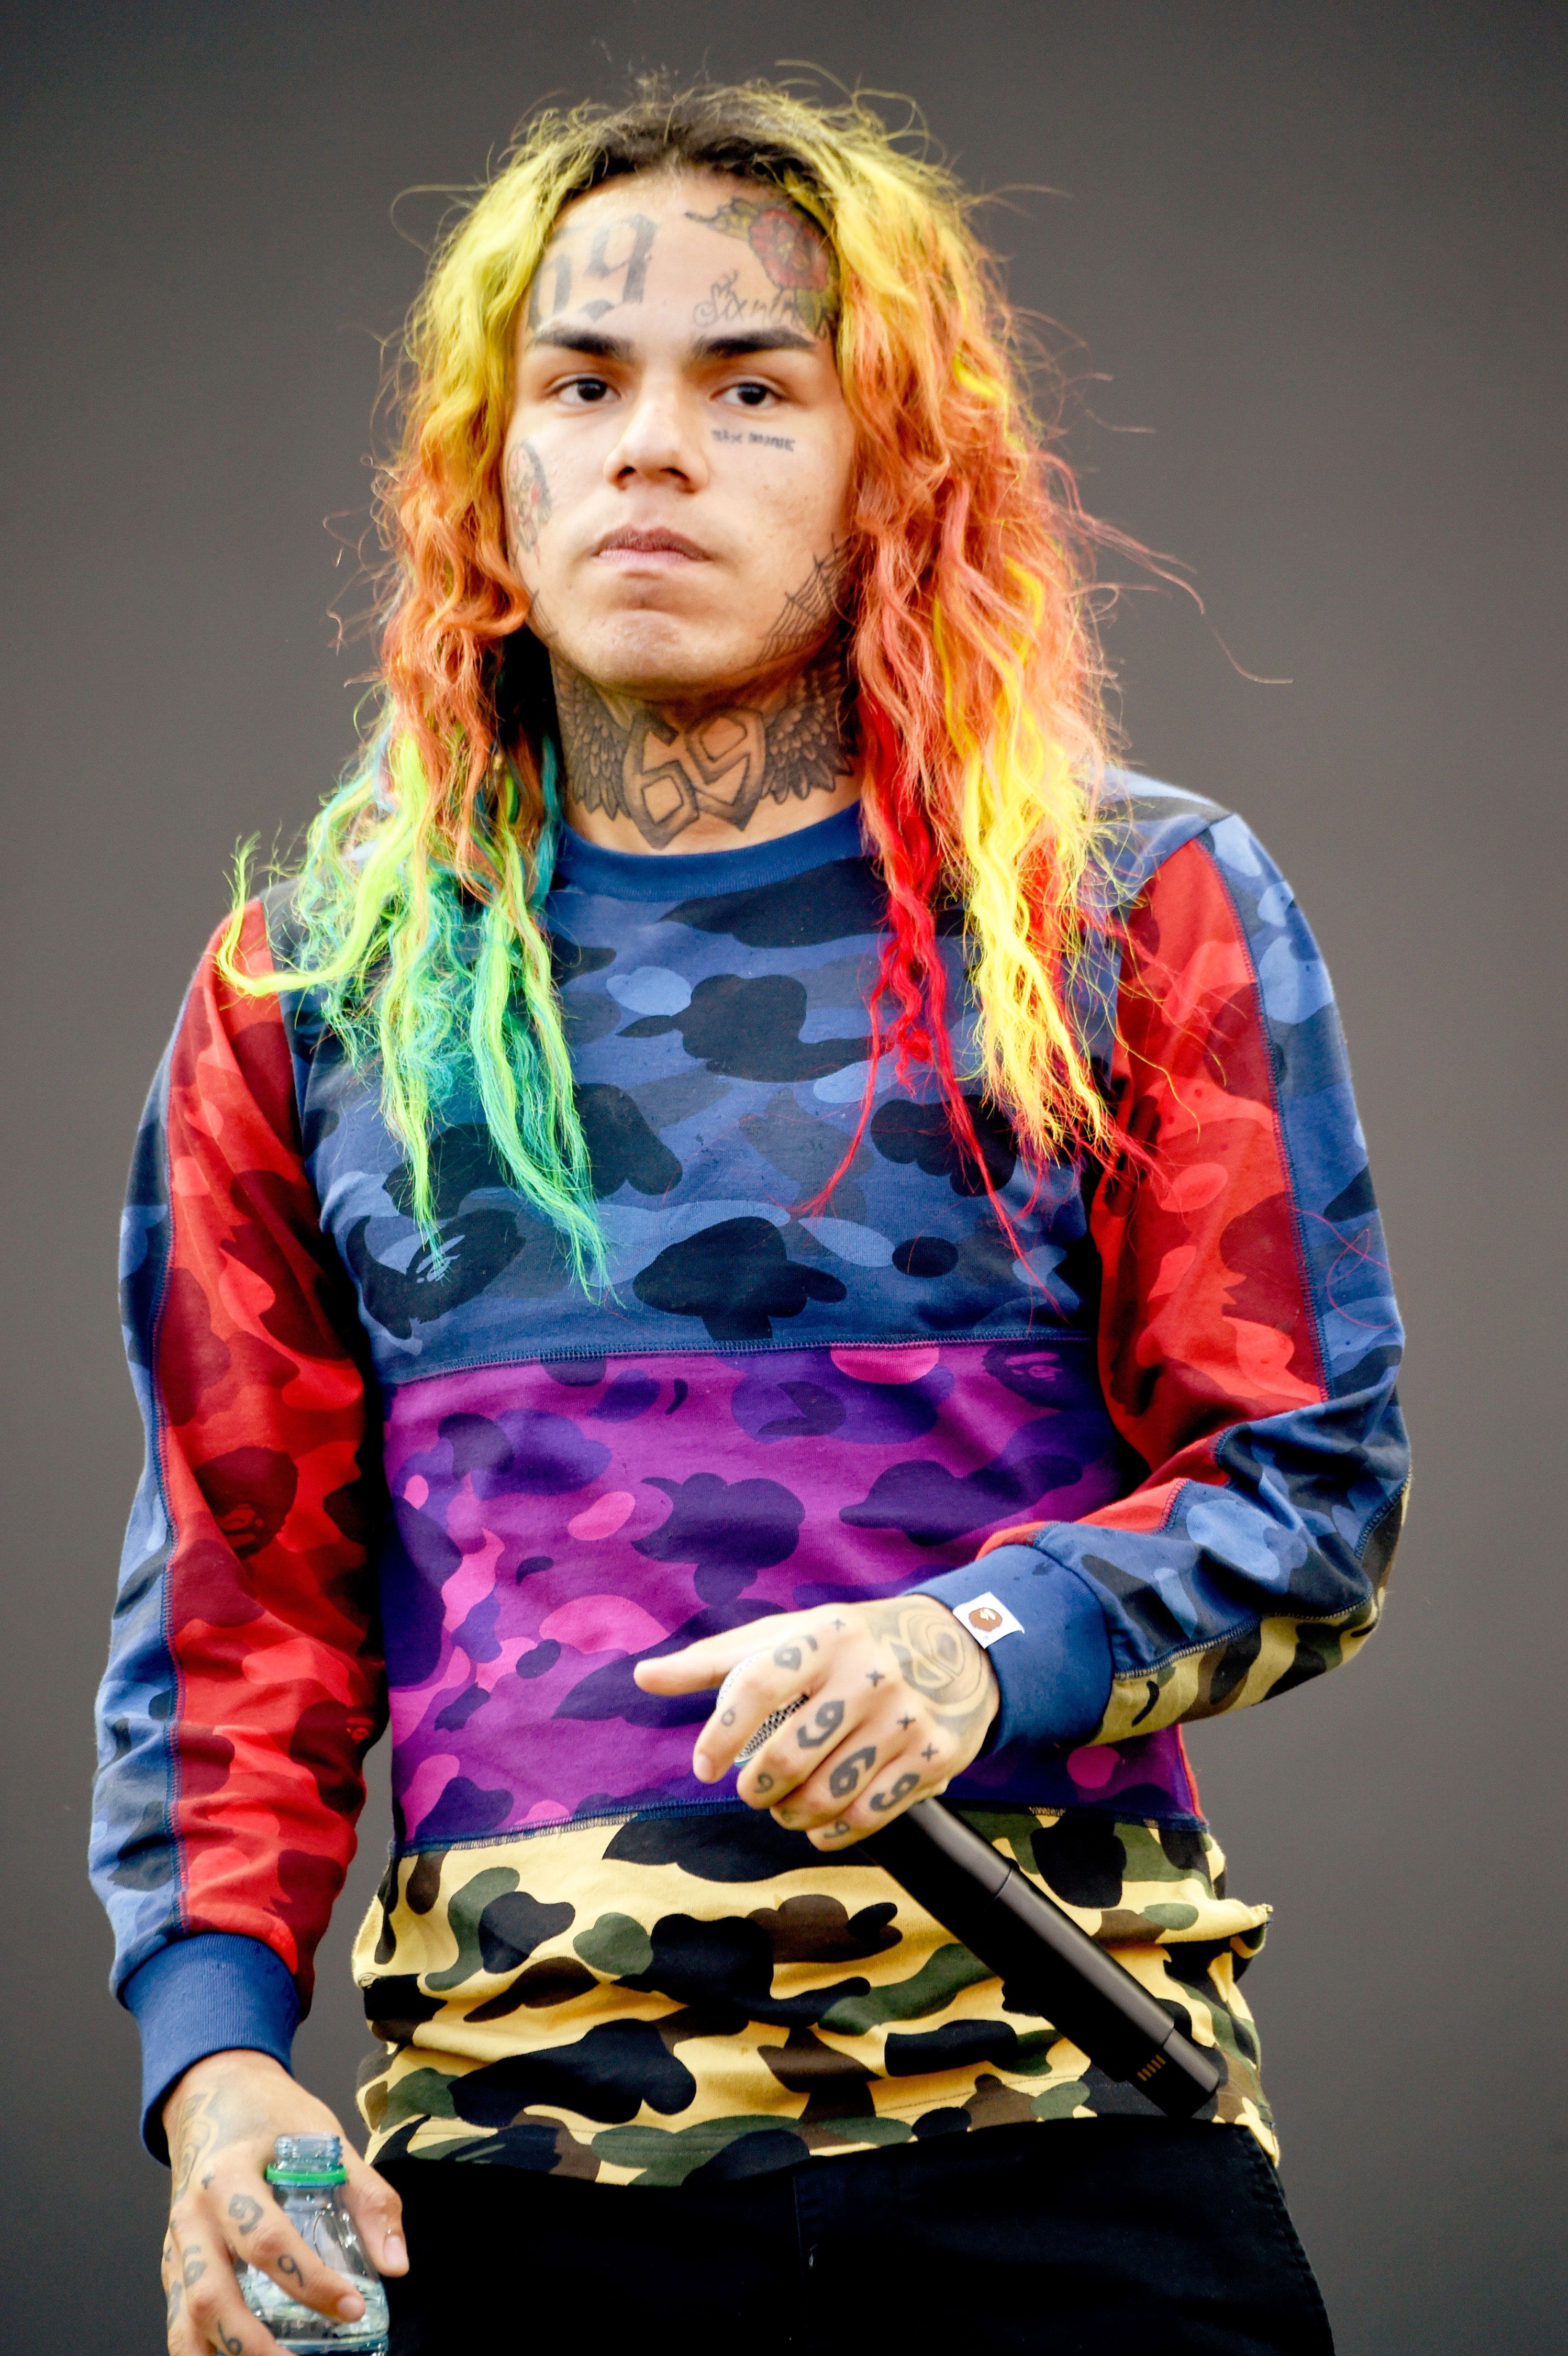 Tekashi69 Sued by 13-Year-Old in Sex-Video Case